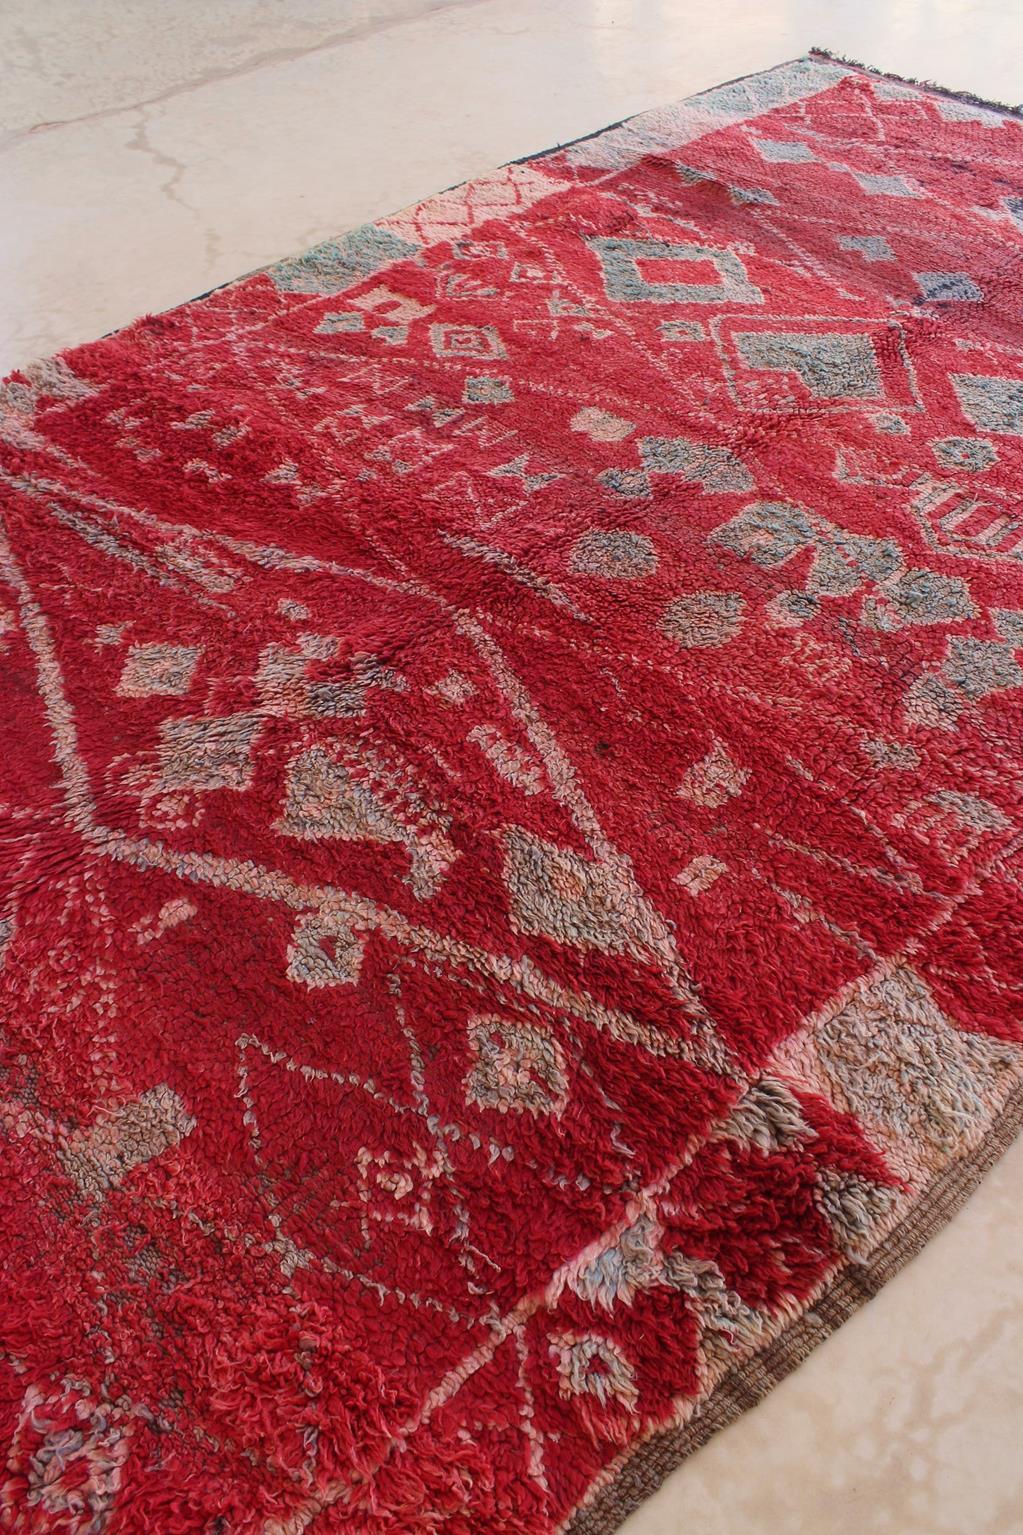 Vintage Moroccan Zayane rug - Red/green - 7x12feet / 213x365cm In Fair Condition For Sale In Marrakech, MA